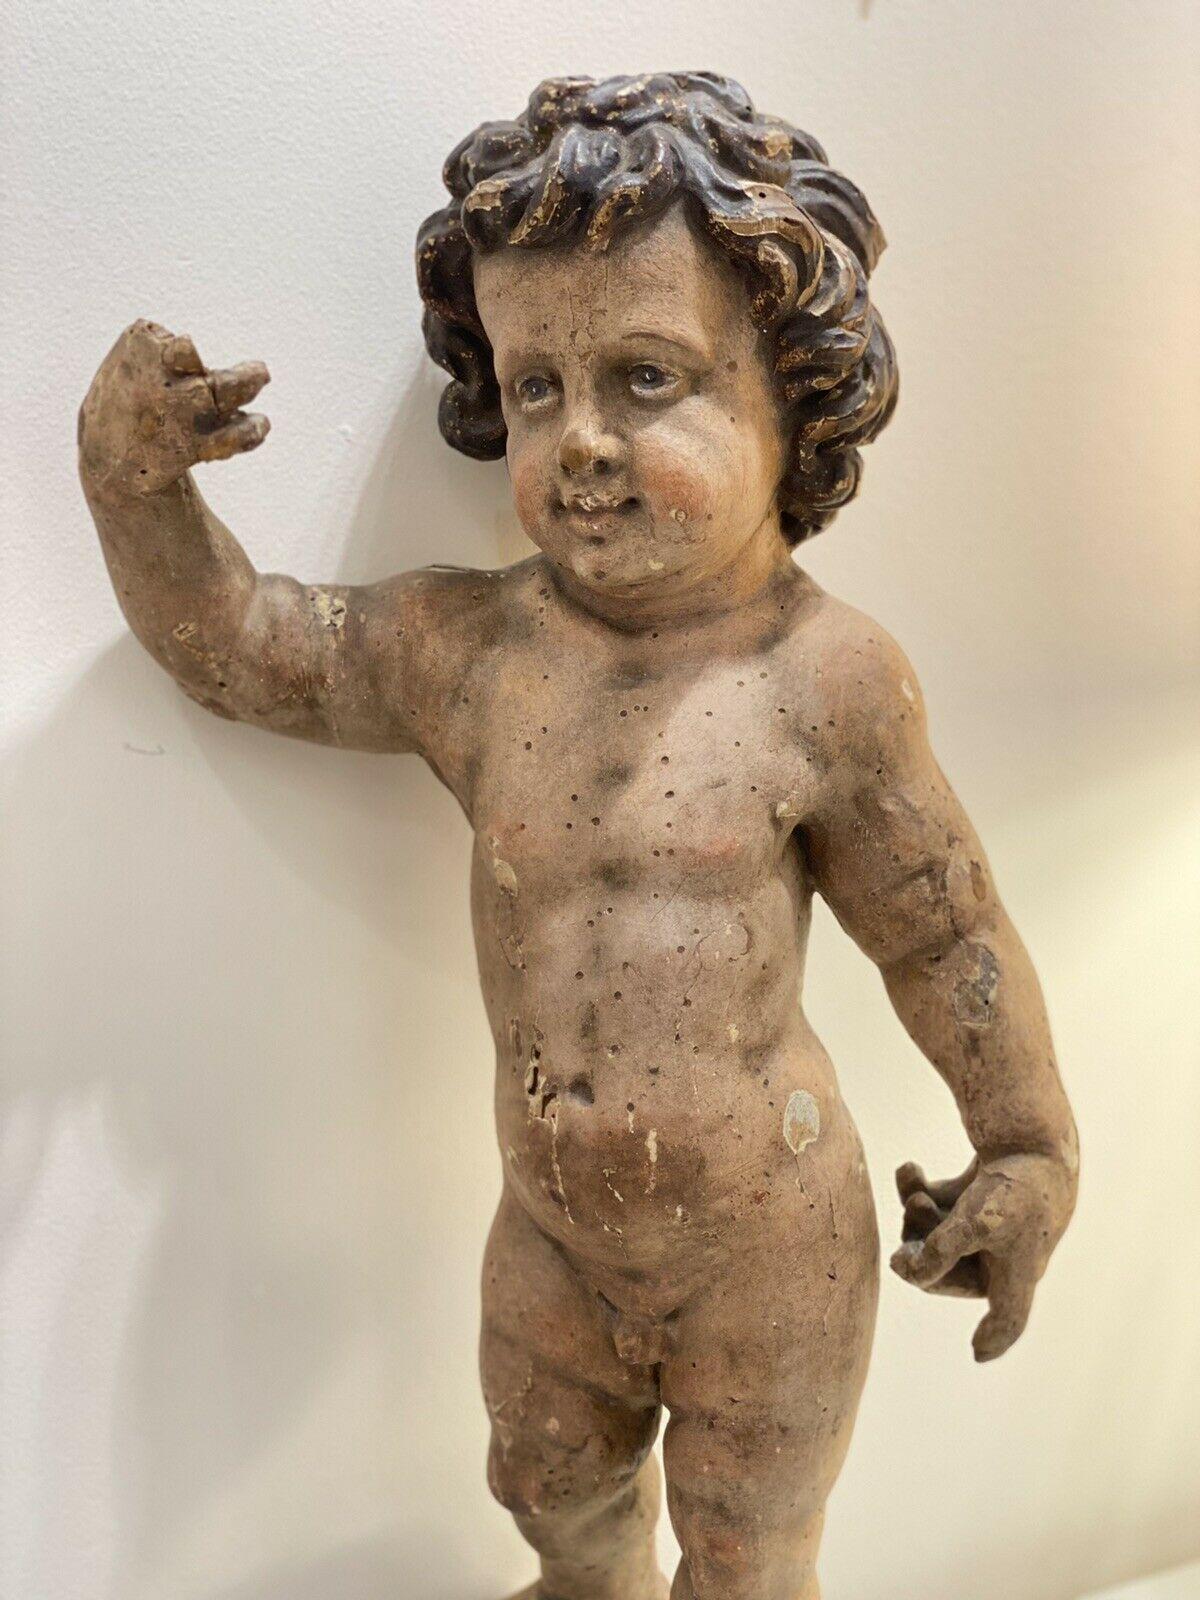 On offer an 18thc Large Beautiful French Wood Sculpture of a Putto/ Angel Figure. There are losses, on fingers, feet etc. Please look closely at pictures. This is a piece of antiquity. Non active wood worm holes. I purchased this sculpture from a